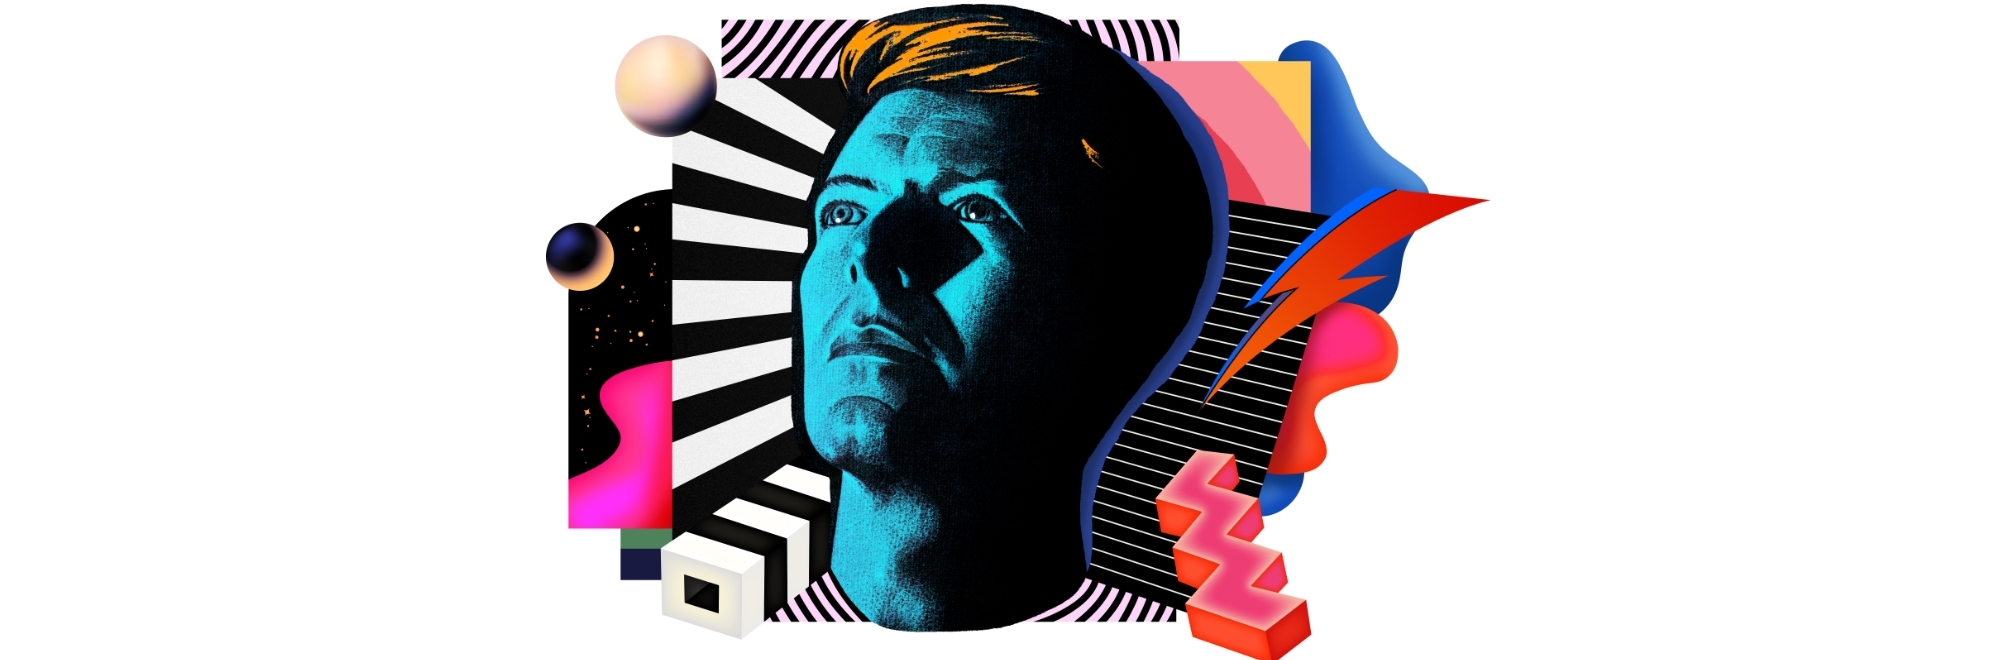 Adobe invites people to create their own personas with digitised tools inspired by David Bowie